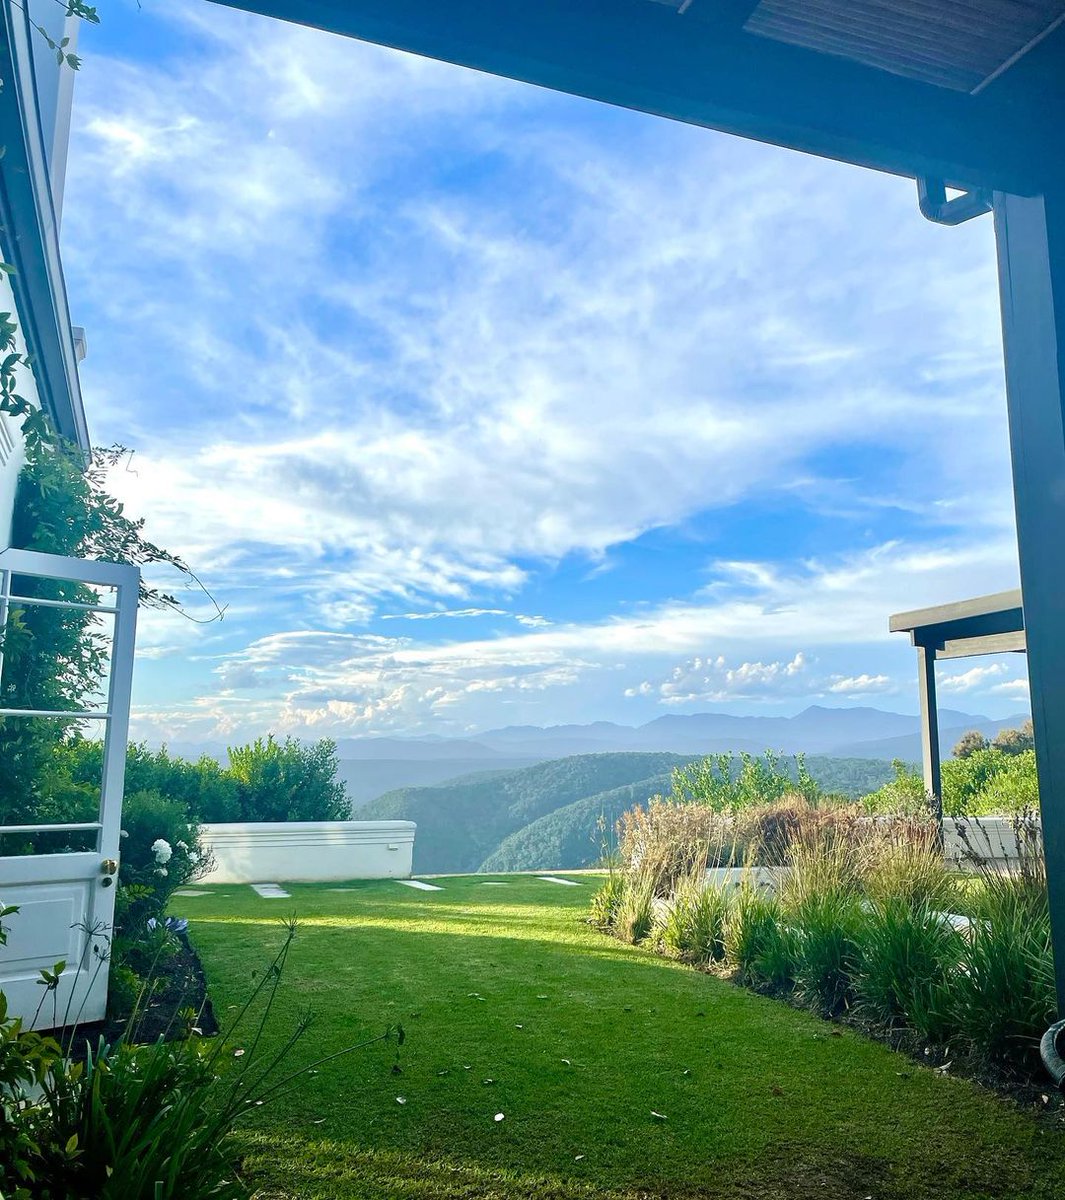 📍 Fairview House, The Crags, Plettenberg Bay,
G & T time ? . . . 🍸
.
.
.

#Fairviewhouse #AfricanSafariCollective #FurtherTogether #plettsafeeling #plettenberg #plett #timetochangeyourview #winoclock #gintime #sunsets #dayslikethese #homesweethome #summertime